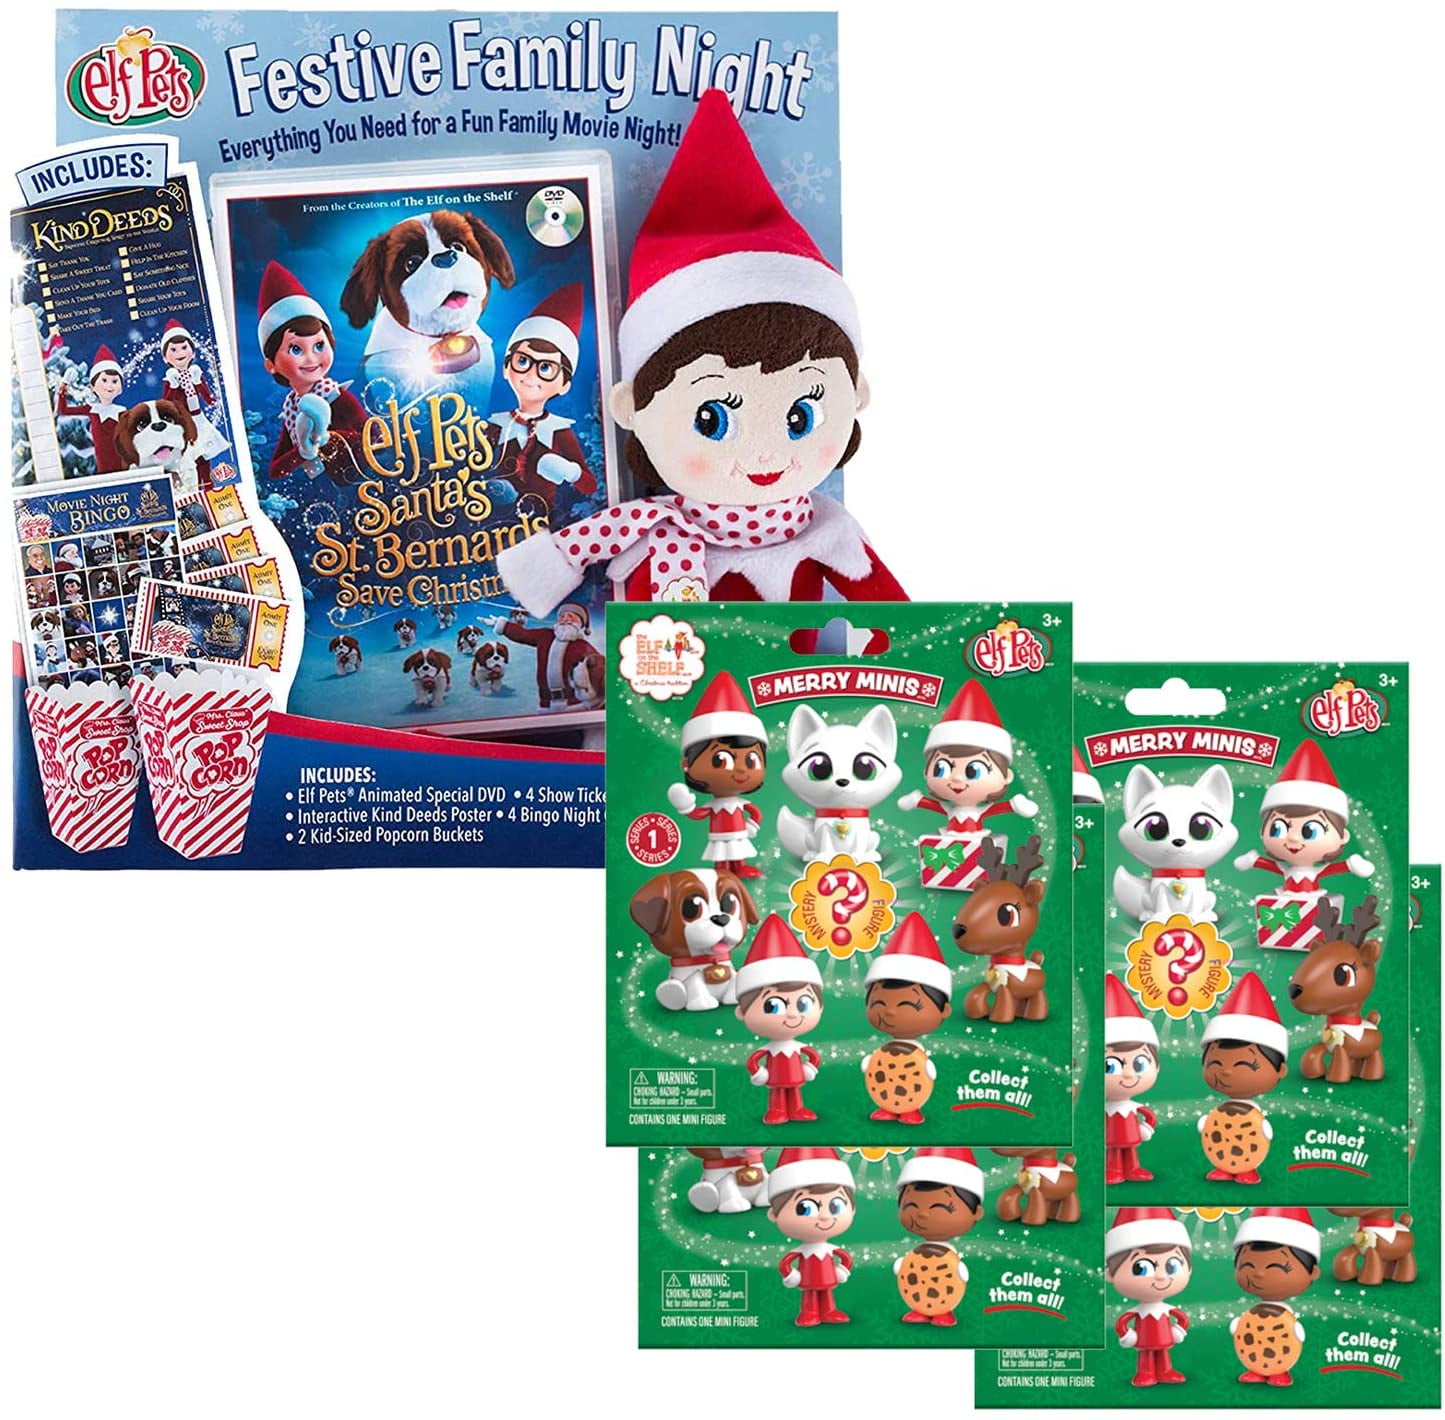 The Elf on the Shelf Festive Family Nights and 4 Merry Mini Figures ...